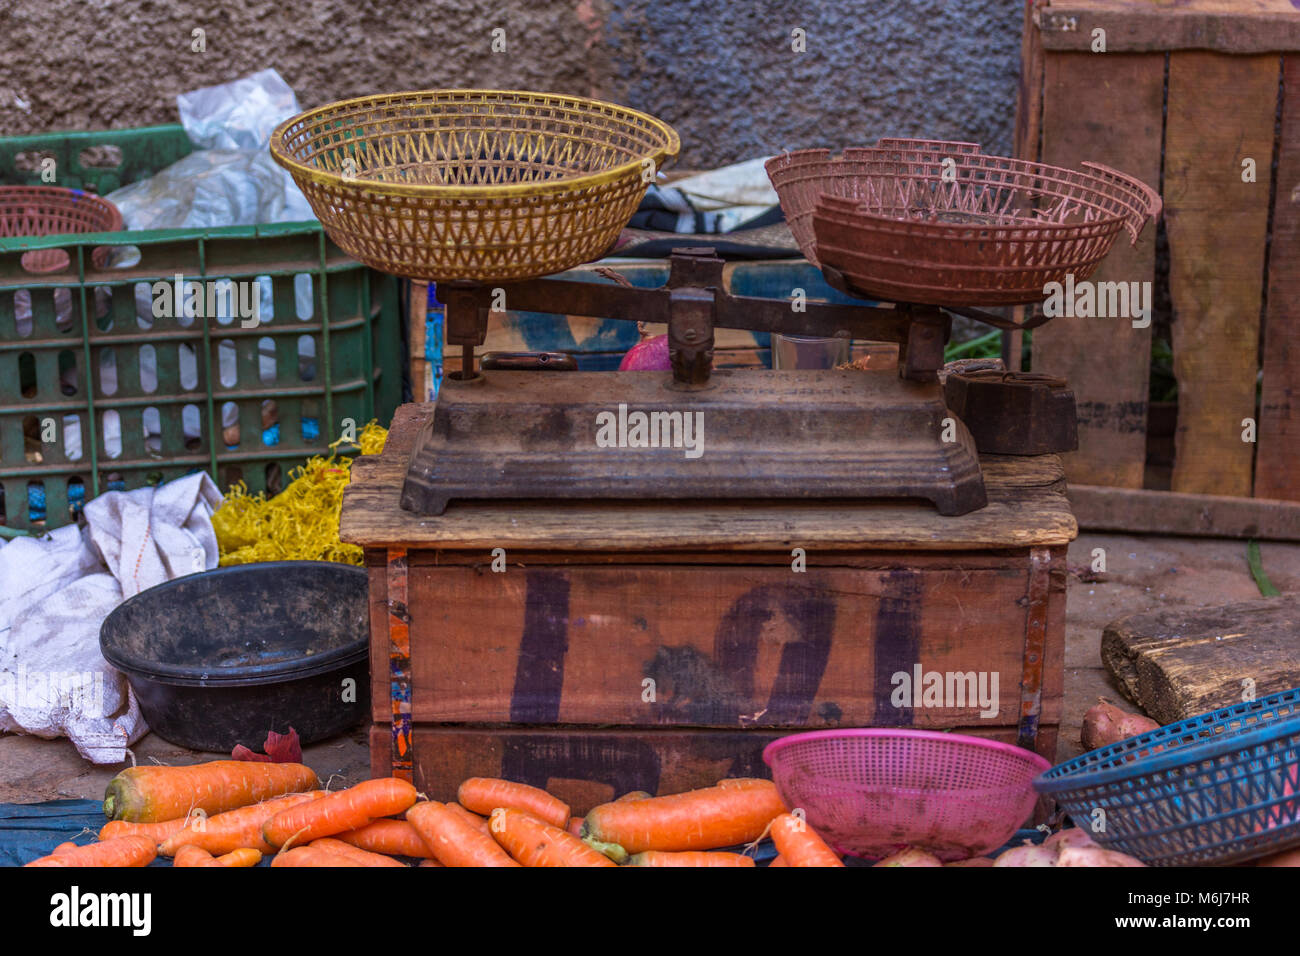 Scales used for weighing fruit and vegetables at a stall in the market, Mellah Quarter, Marrakesh, Morocco. Stock Photo